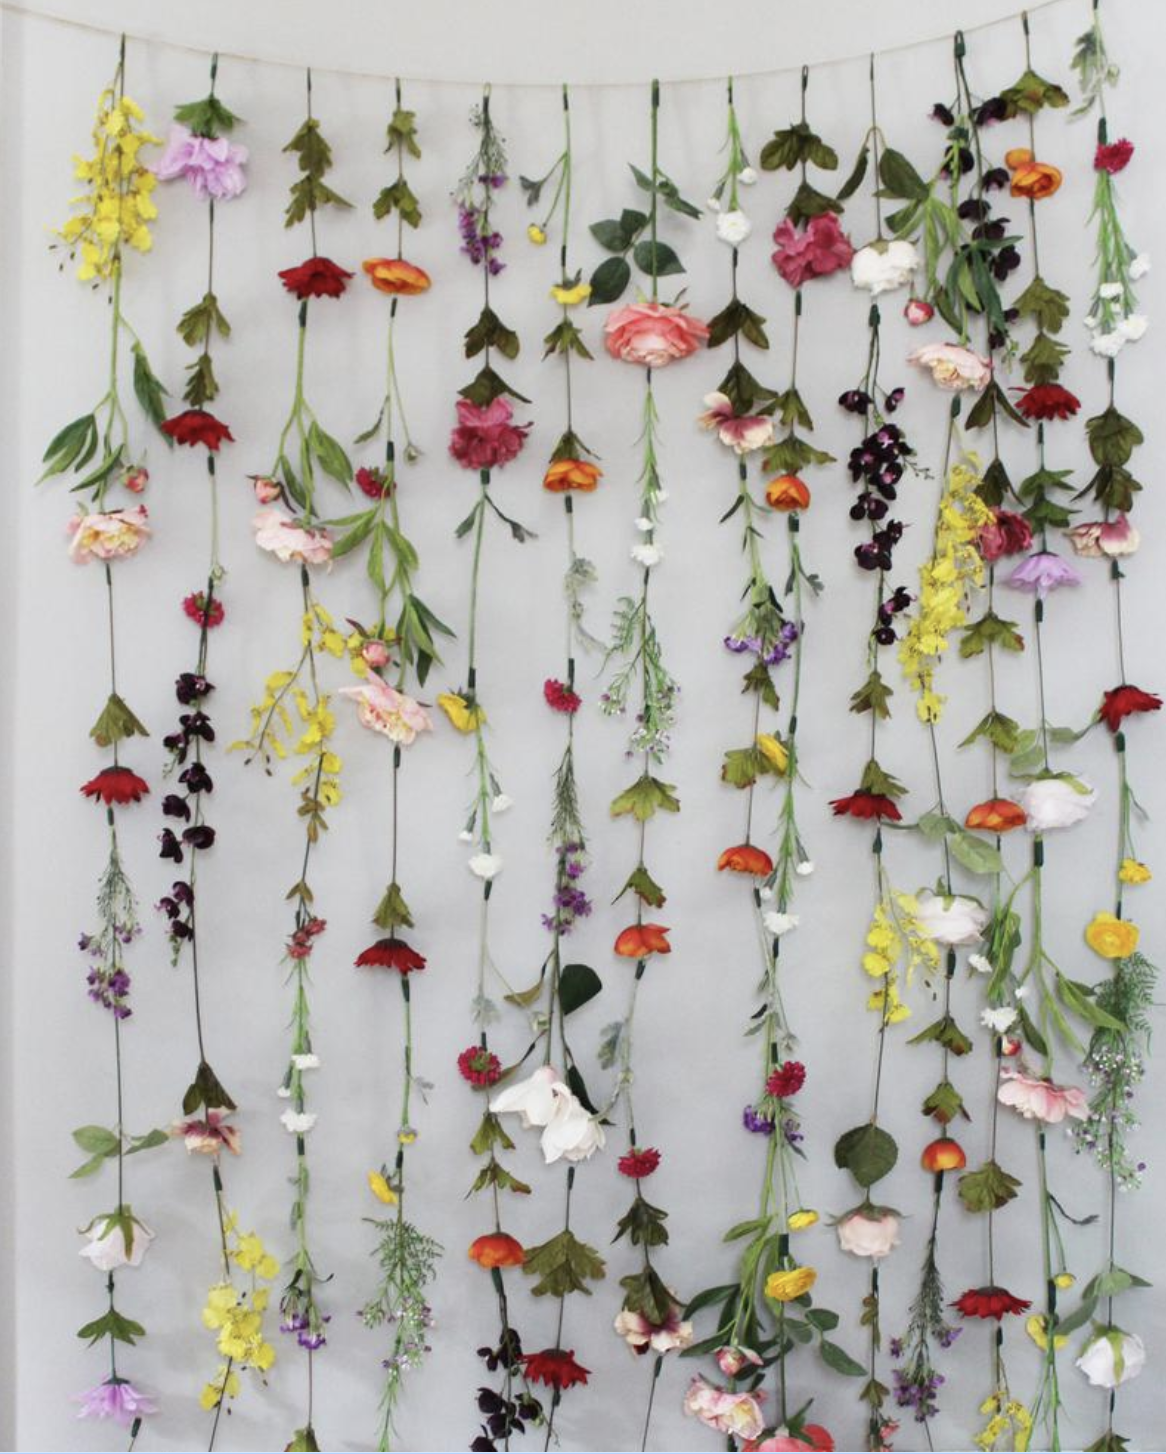 Flower Wall Garlands Are Trending on Pinterest, and You Can DIY ...